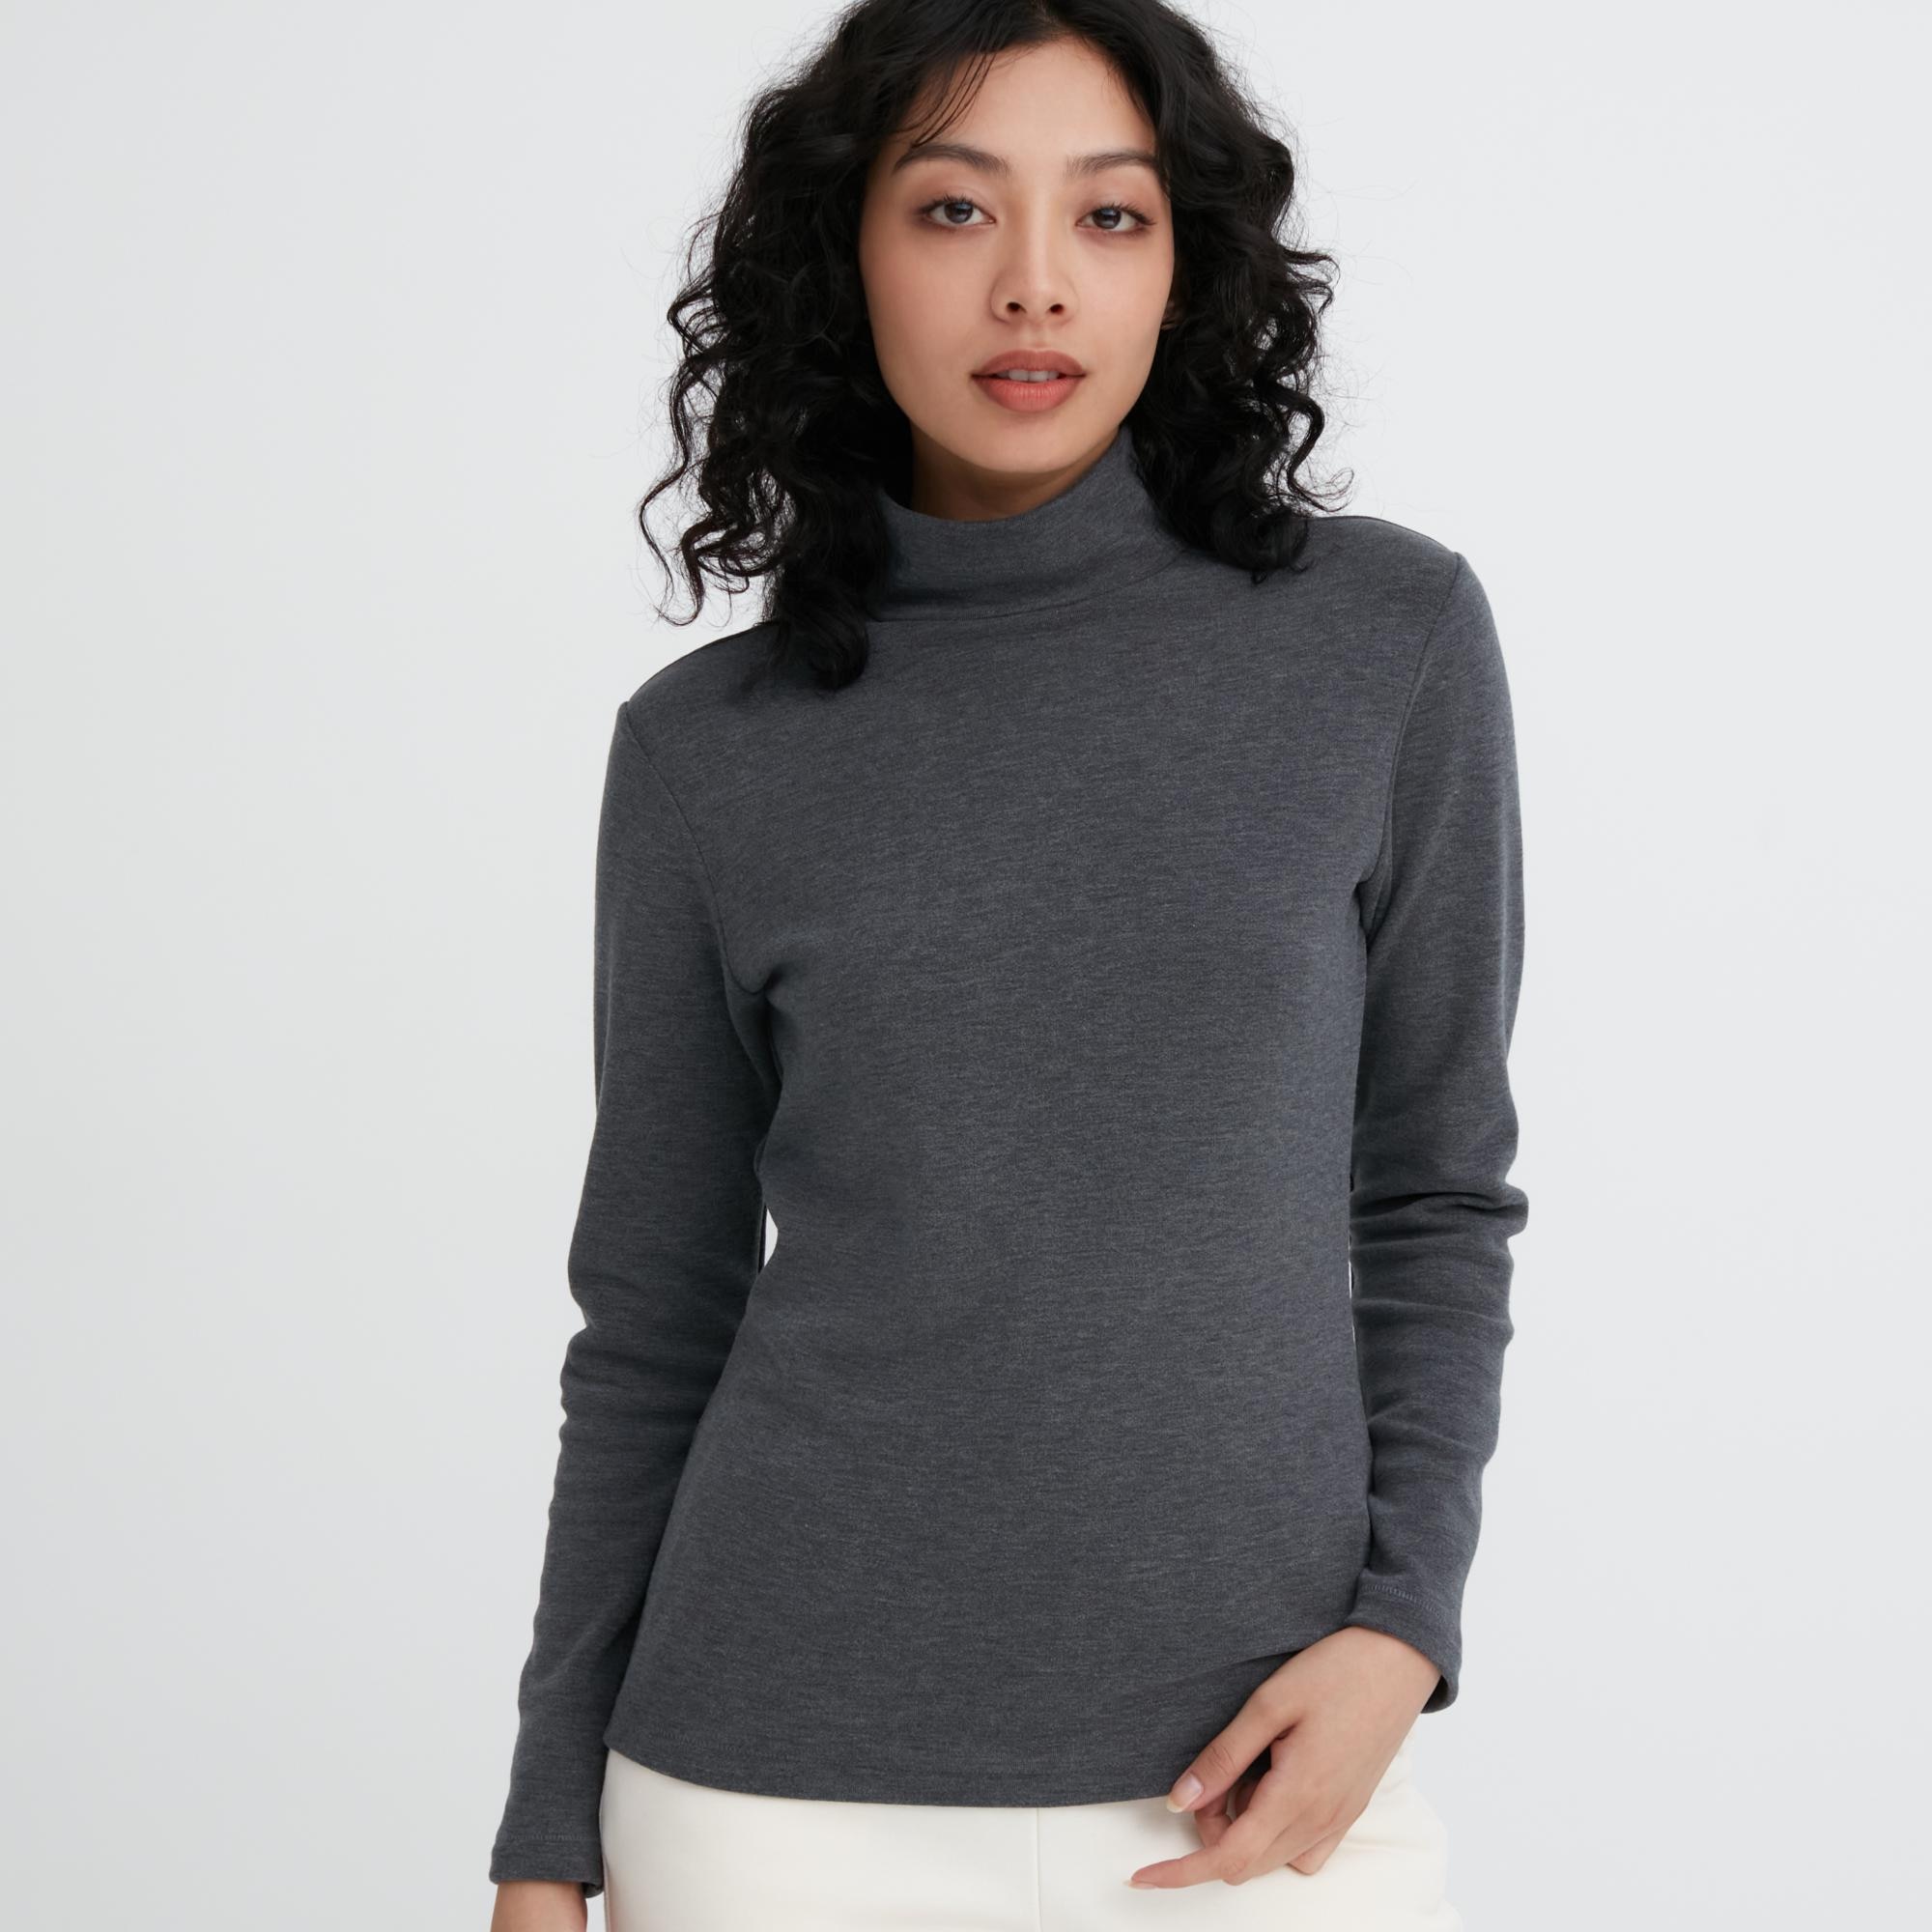 Hey, traveling soon? Check out the latest HEATTECH Collection - Uniqlo USA